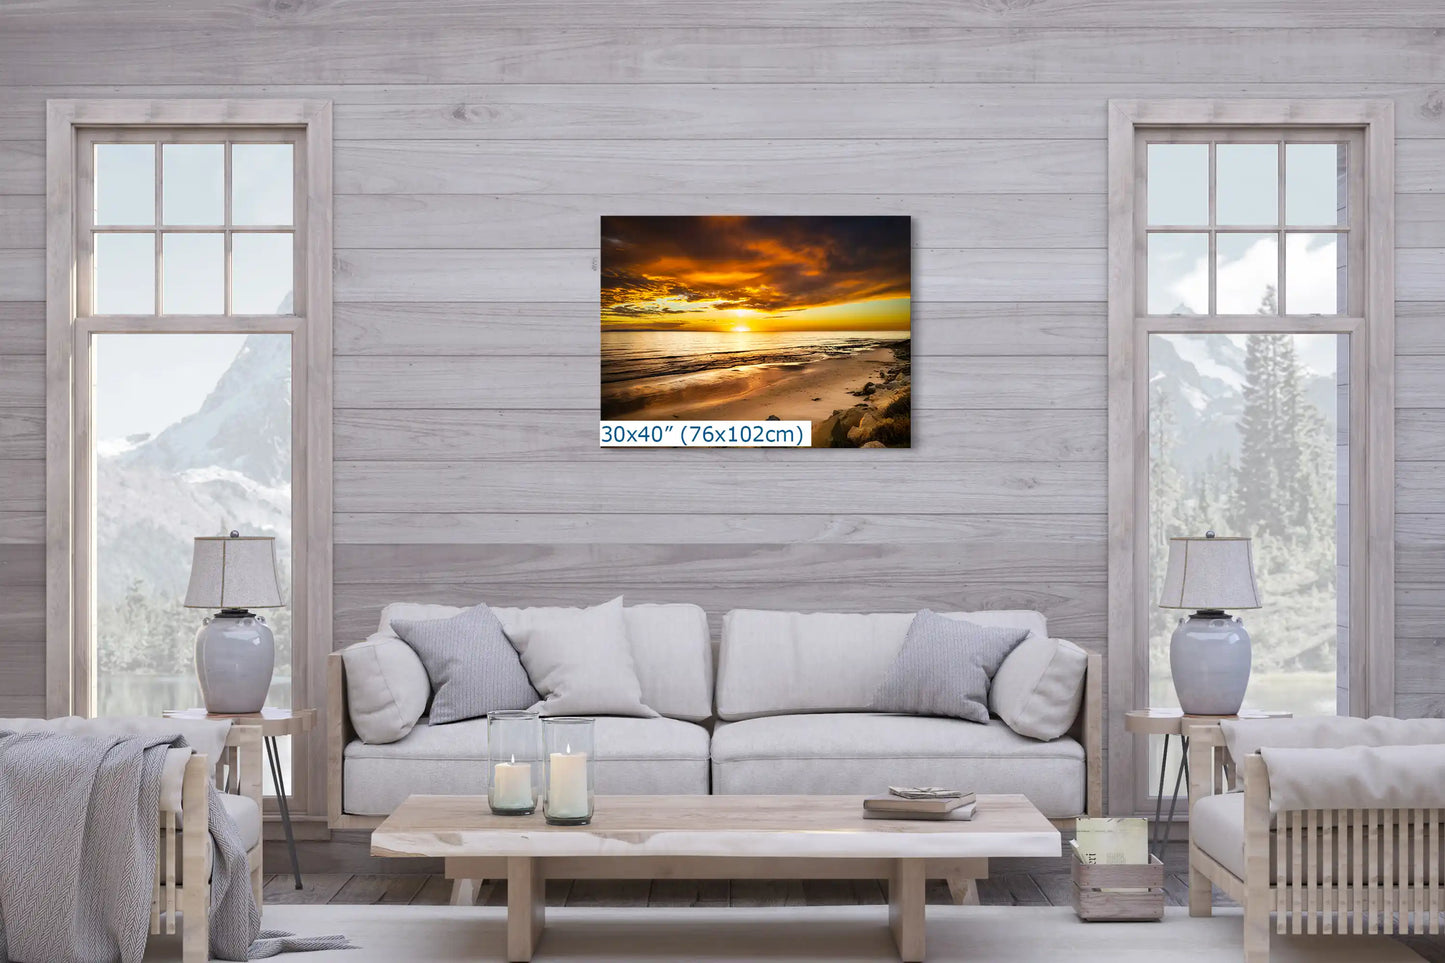 A 30x40 canvas print in a living room, the Hobson Beach sunset evokes a meditative state, harmonizing with the room’s serene decor.